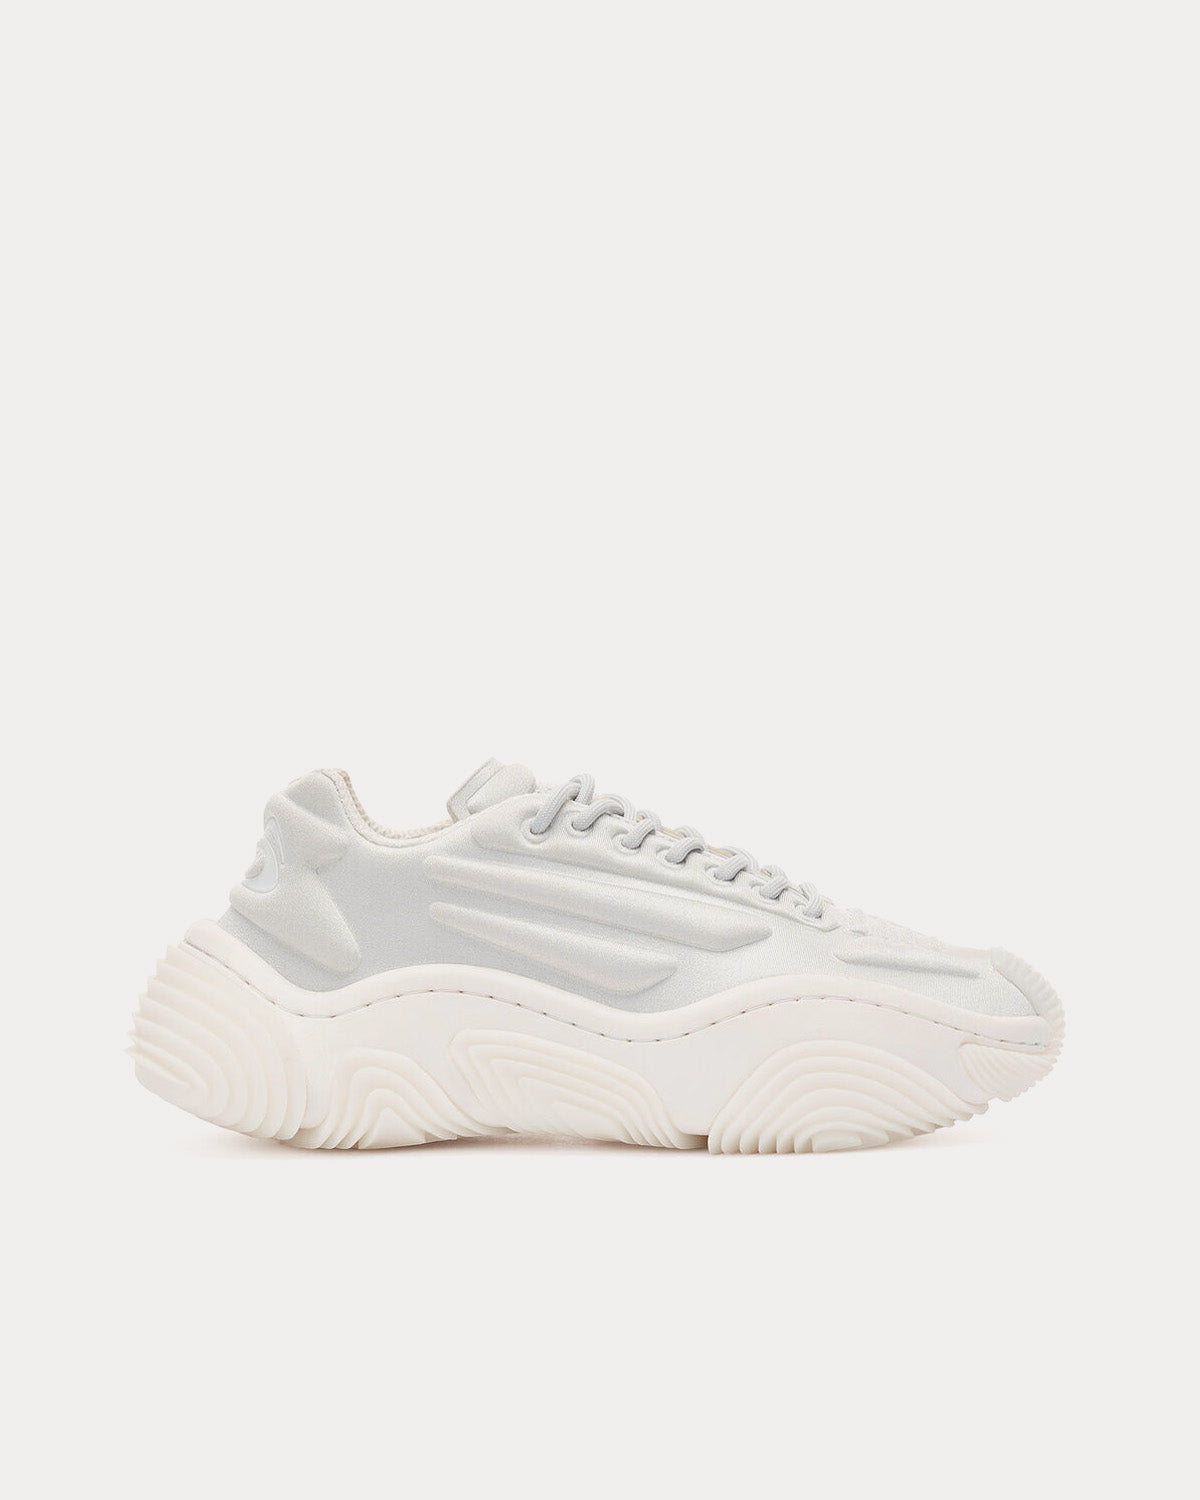 Alexander Wang - AW Vortex Lycra Rainy Day Low Top Sneakers